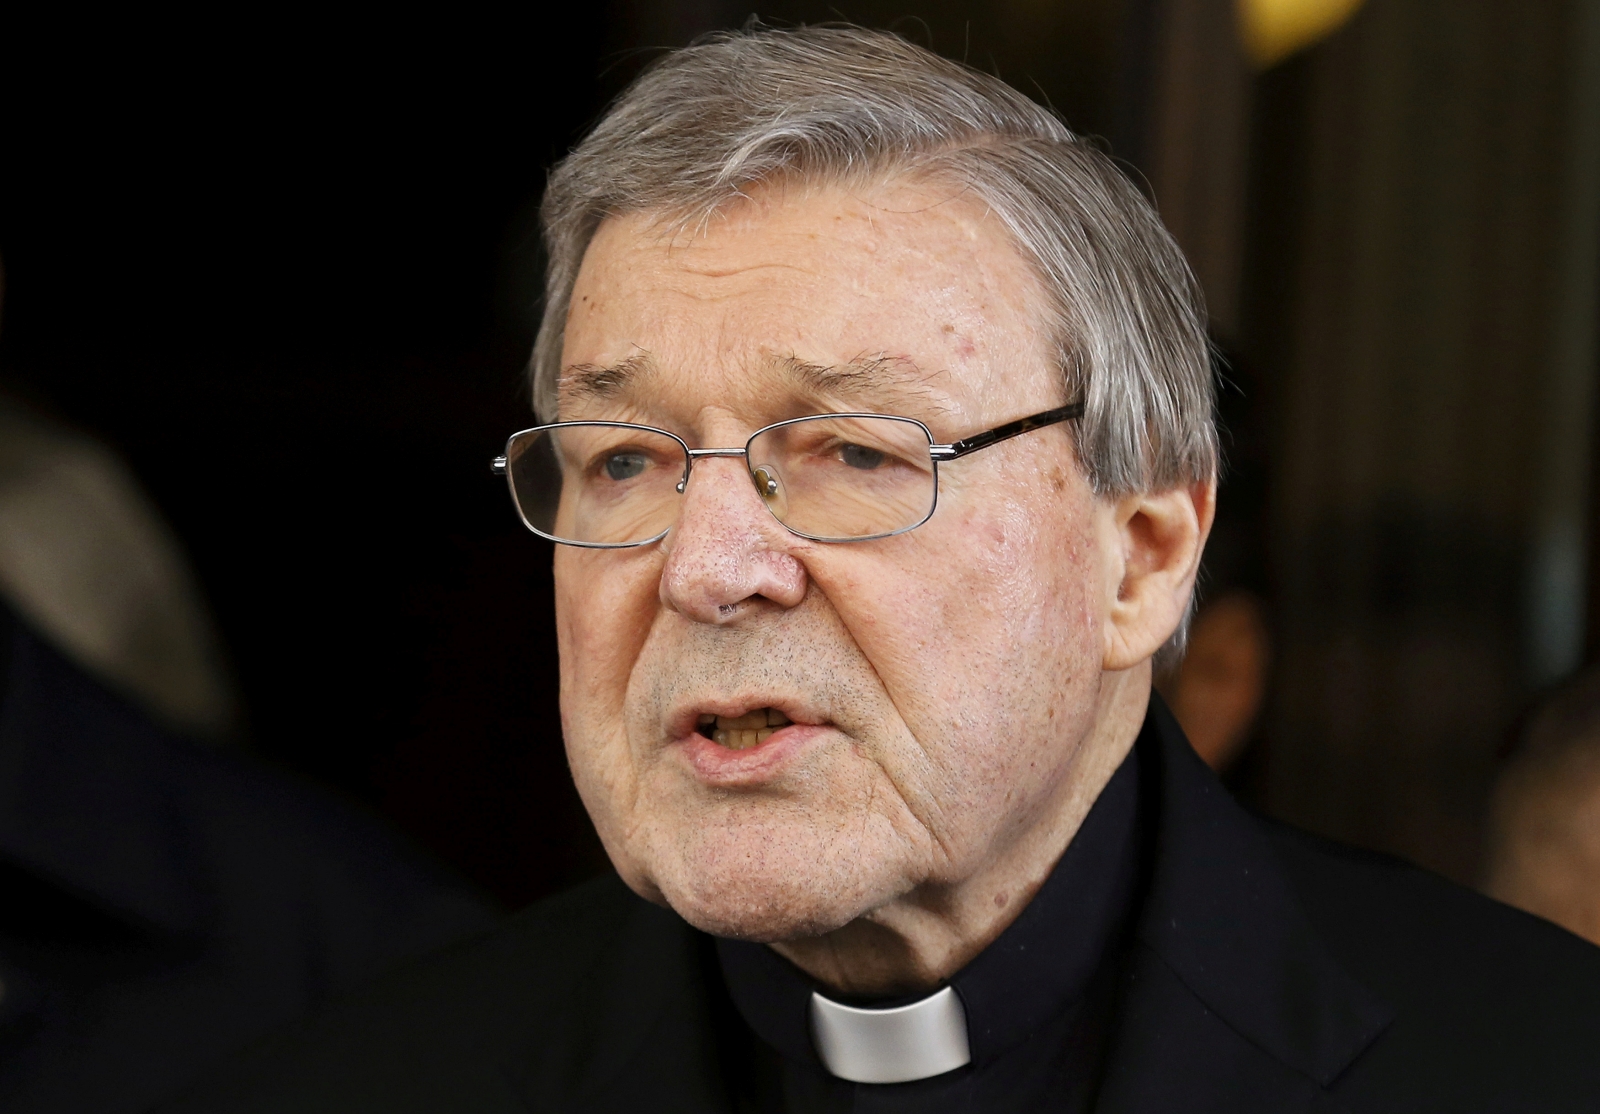 Top Vatican Official, Cardinal George Pell, Charged With Historical Sex Crimes In Australia